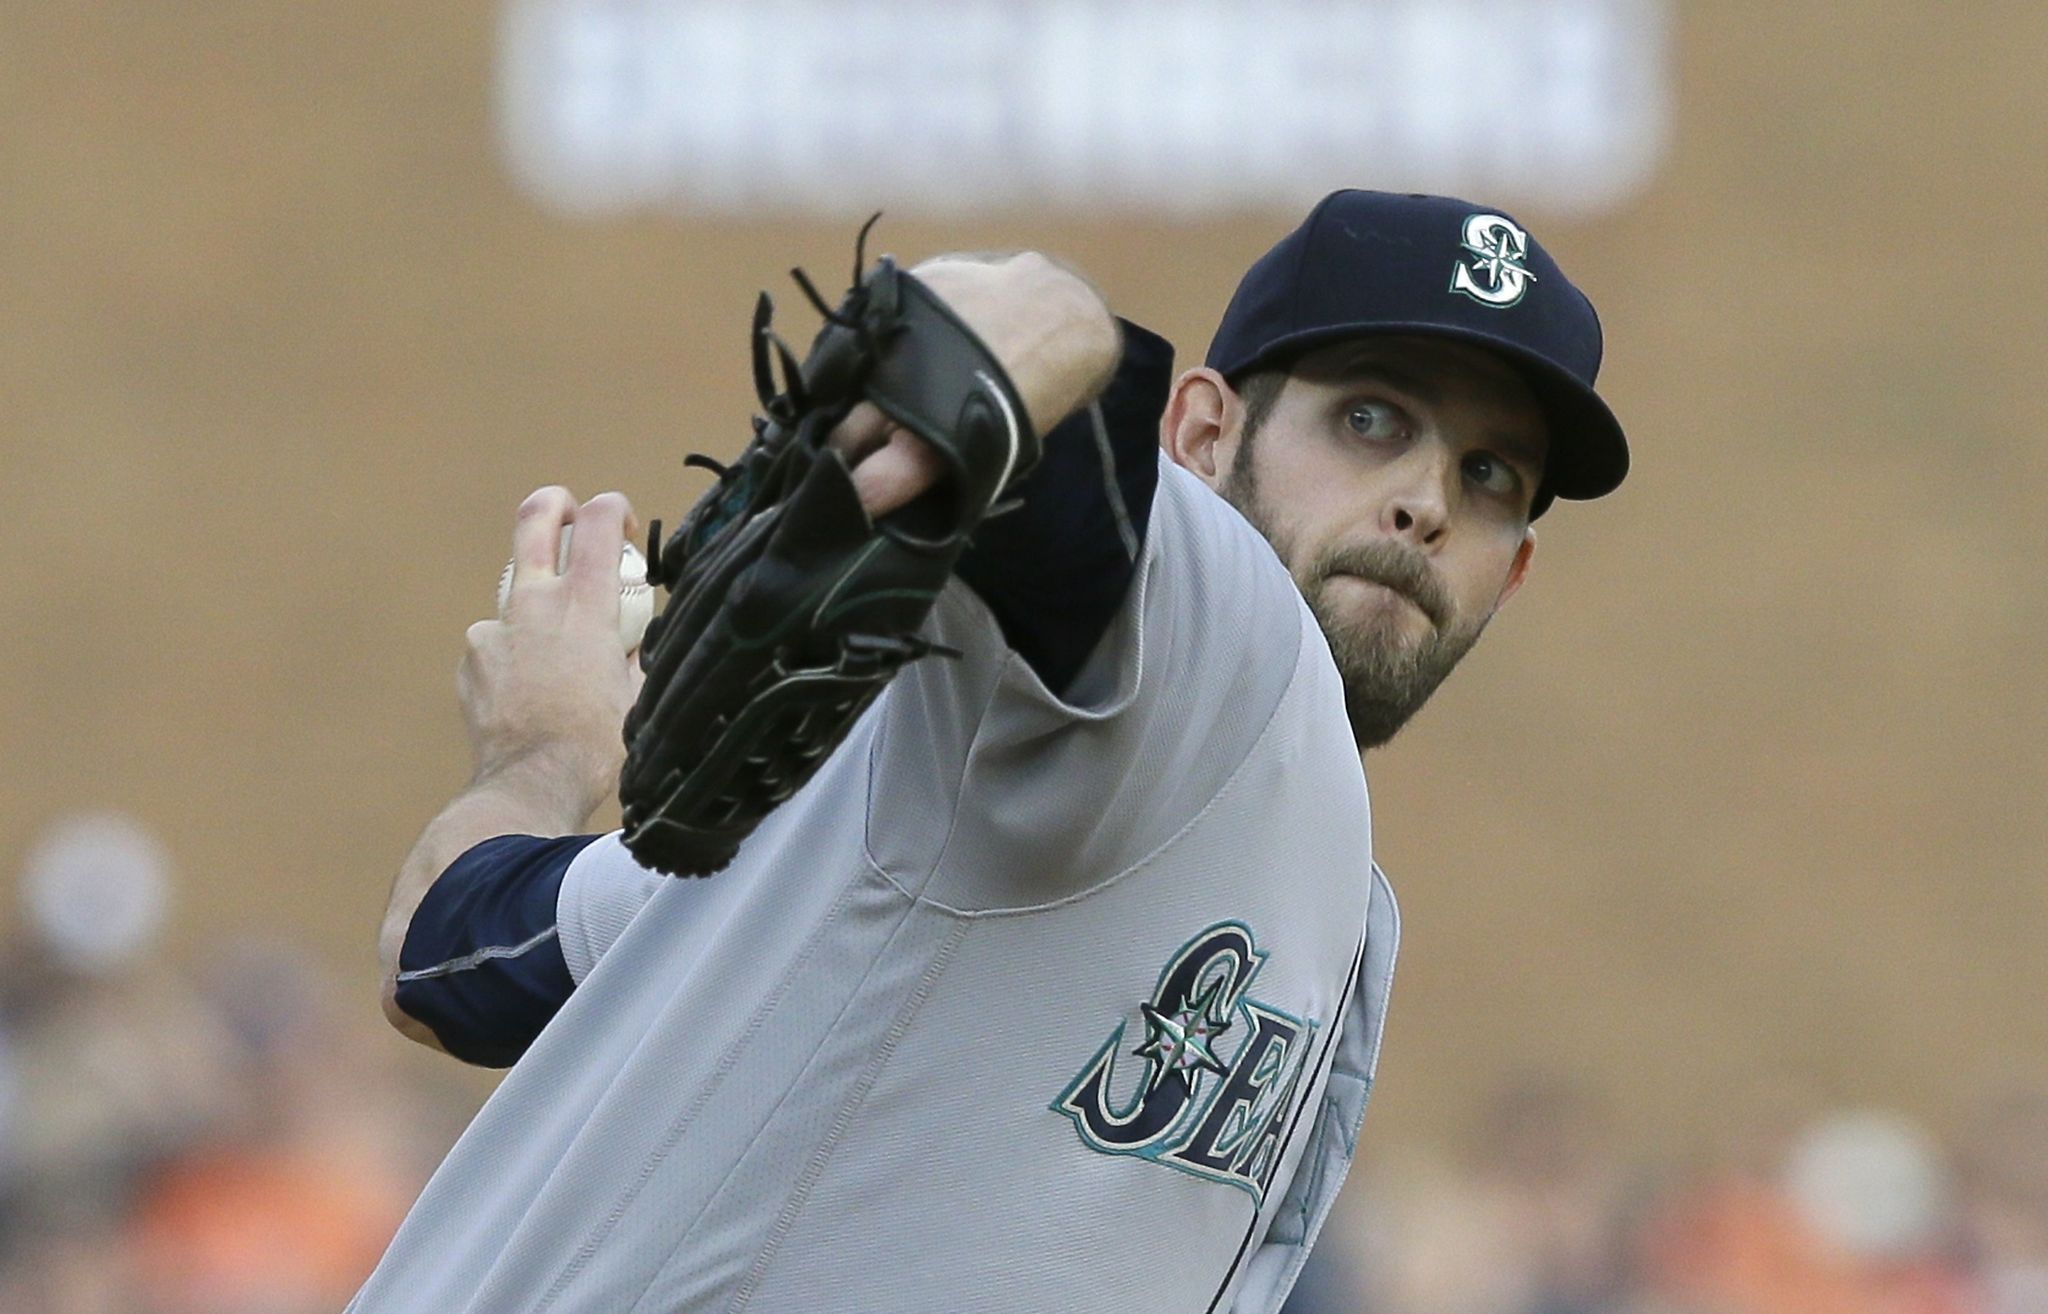 Mariners starter James Paxton (1-3) allowed four runs and 11 hits in 7 2/3 innings. He walked three and struck out five.